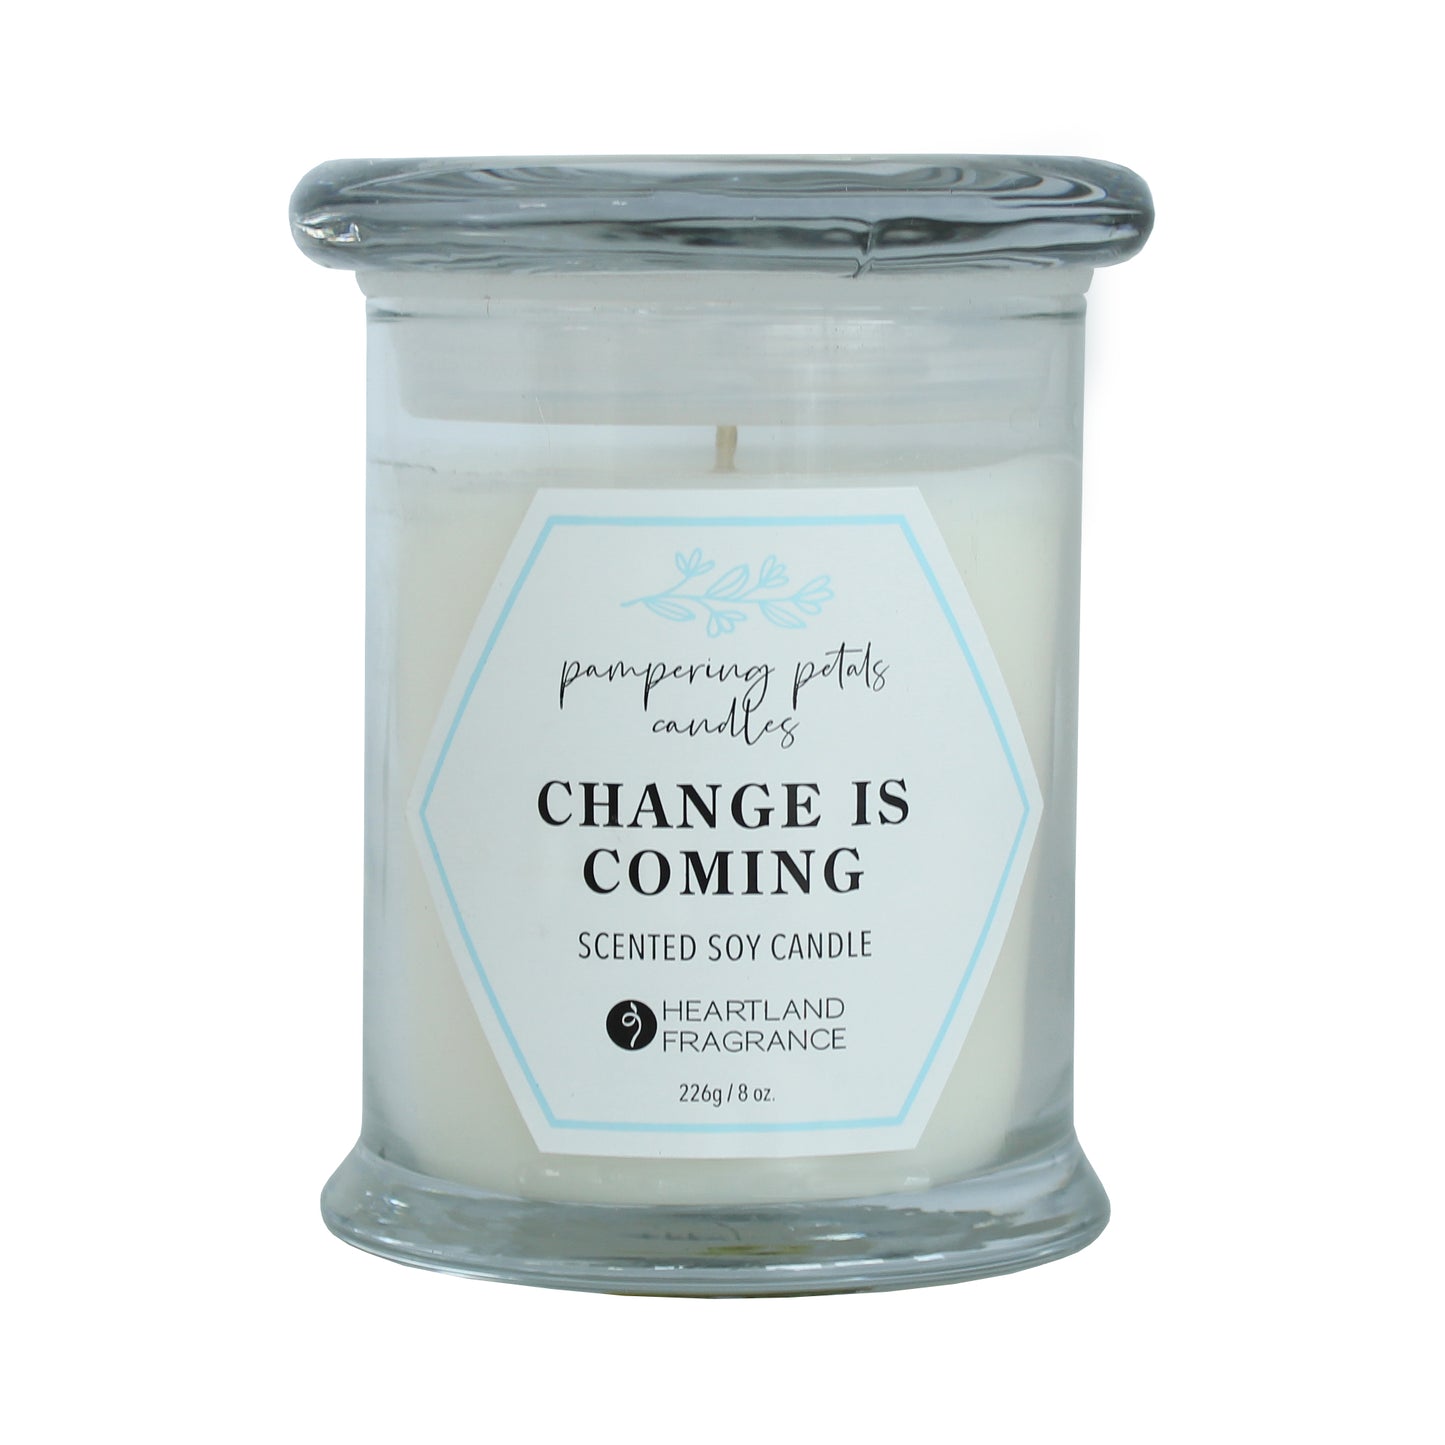 Pampering Petals Change is Coming Soy Candle